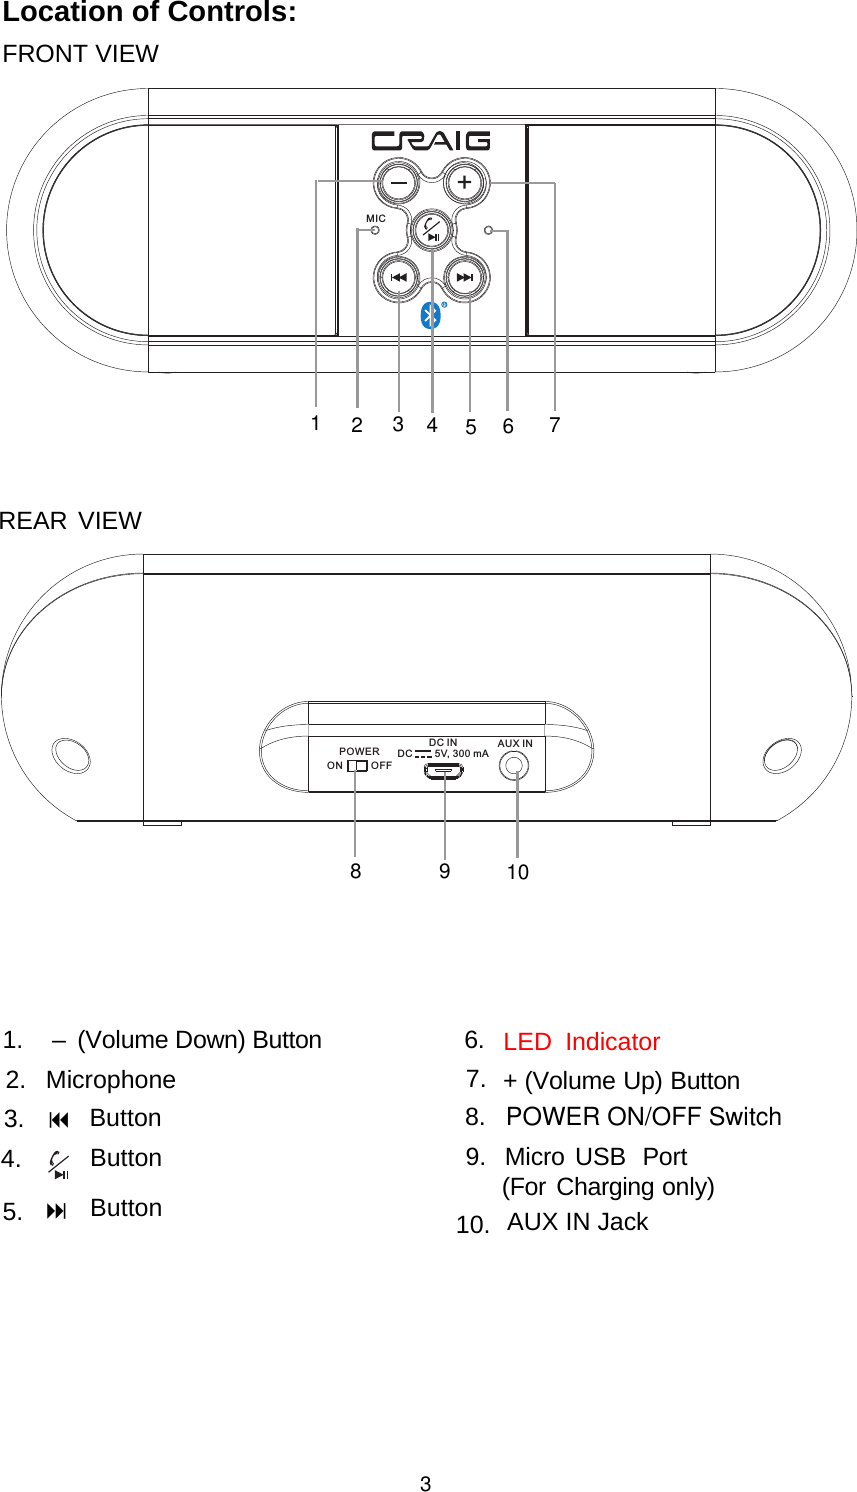 Location of Controls:FRONT VIEW4.2.3.7.310.  POWER ON/OFF SwitchMIC123456AUX INON       OFFDC INDC        5V, 300 mAPOWER10895.LED Indicator8.Microphone71.   (Volum e   Down)  Bu t to n 6.+ (Volume Up) Button9. Micro USB Port(For Charging only)AUX IN JackREAR VIEW–ButtonButtonButton